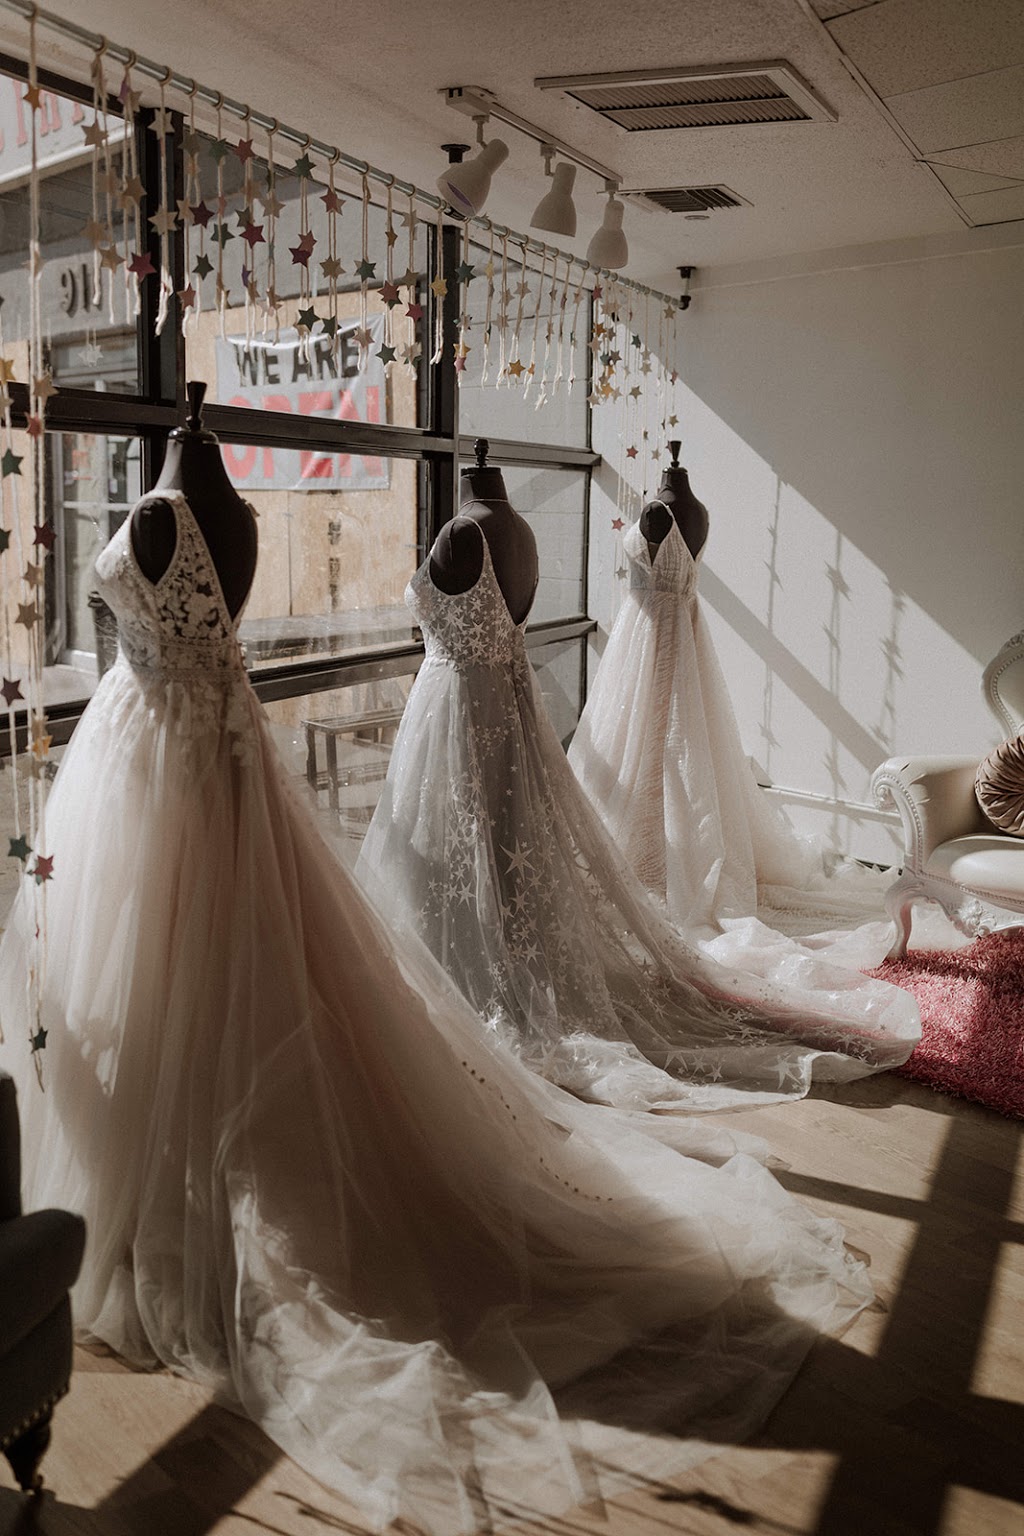 The 8 Best Bridal Boutiques in the Las Vegas Area